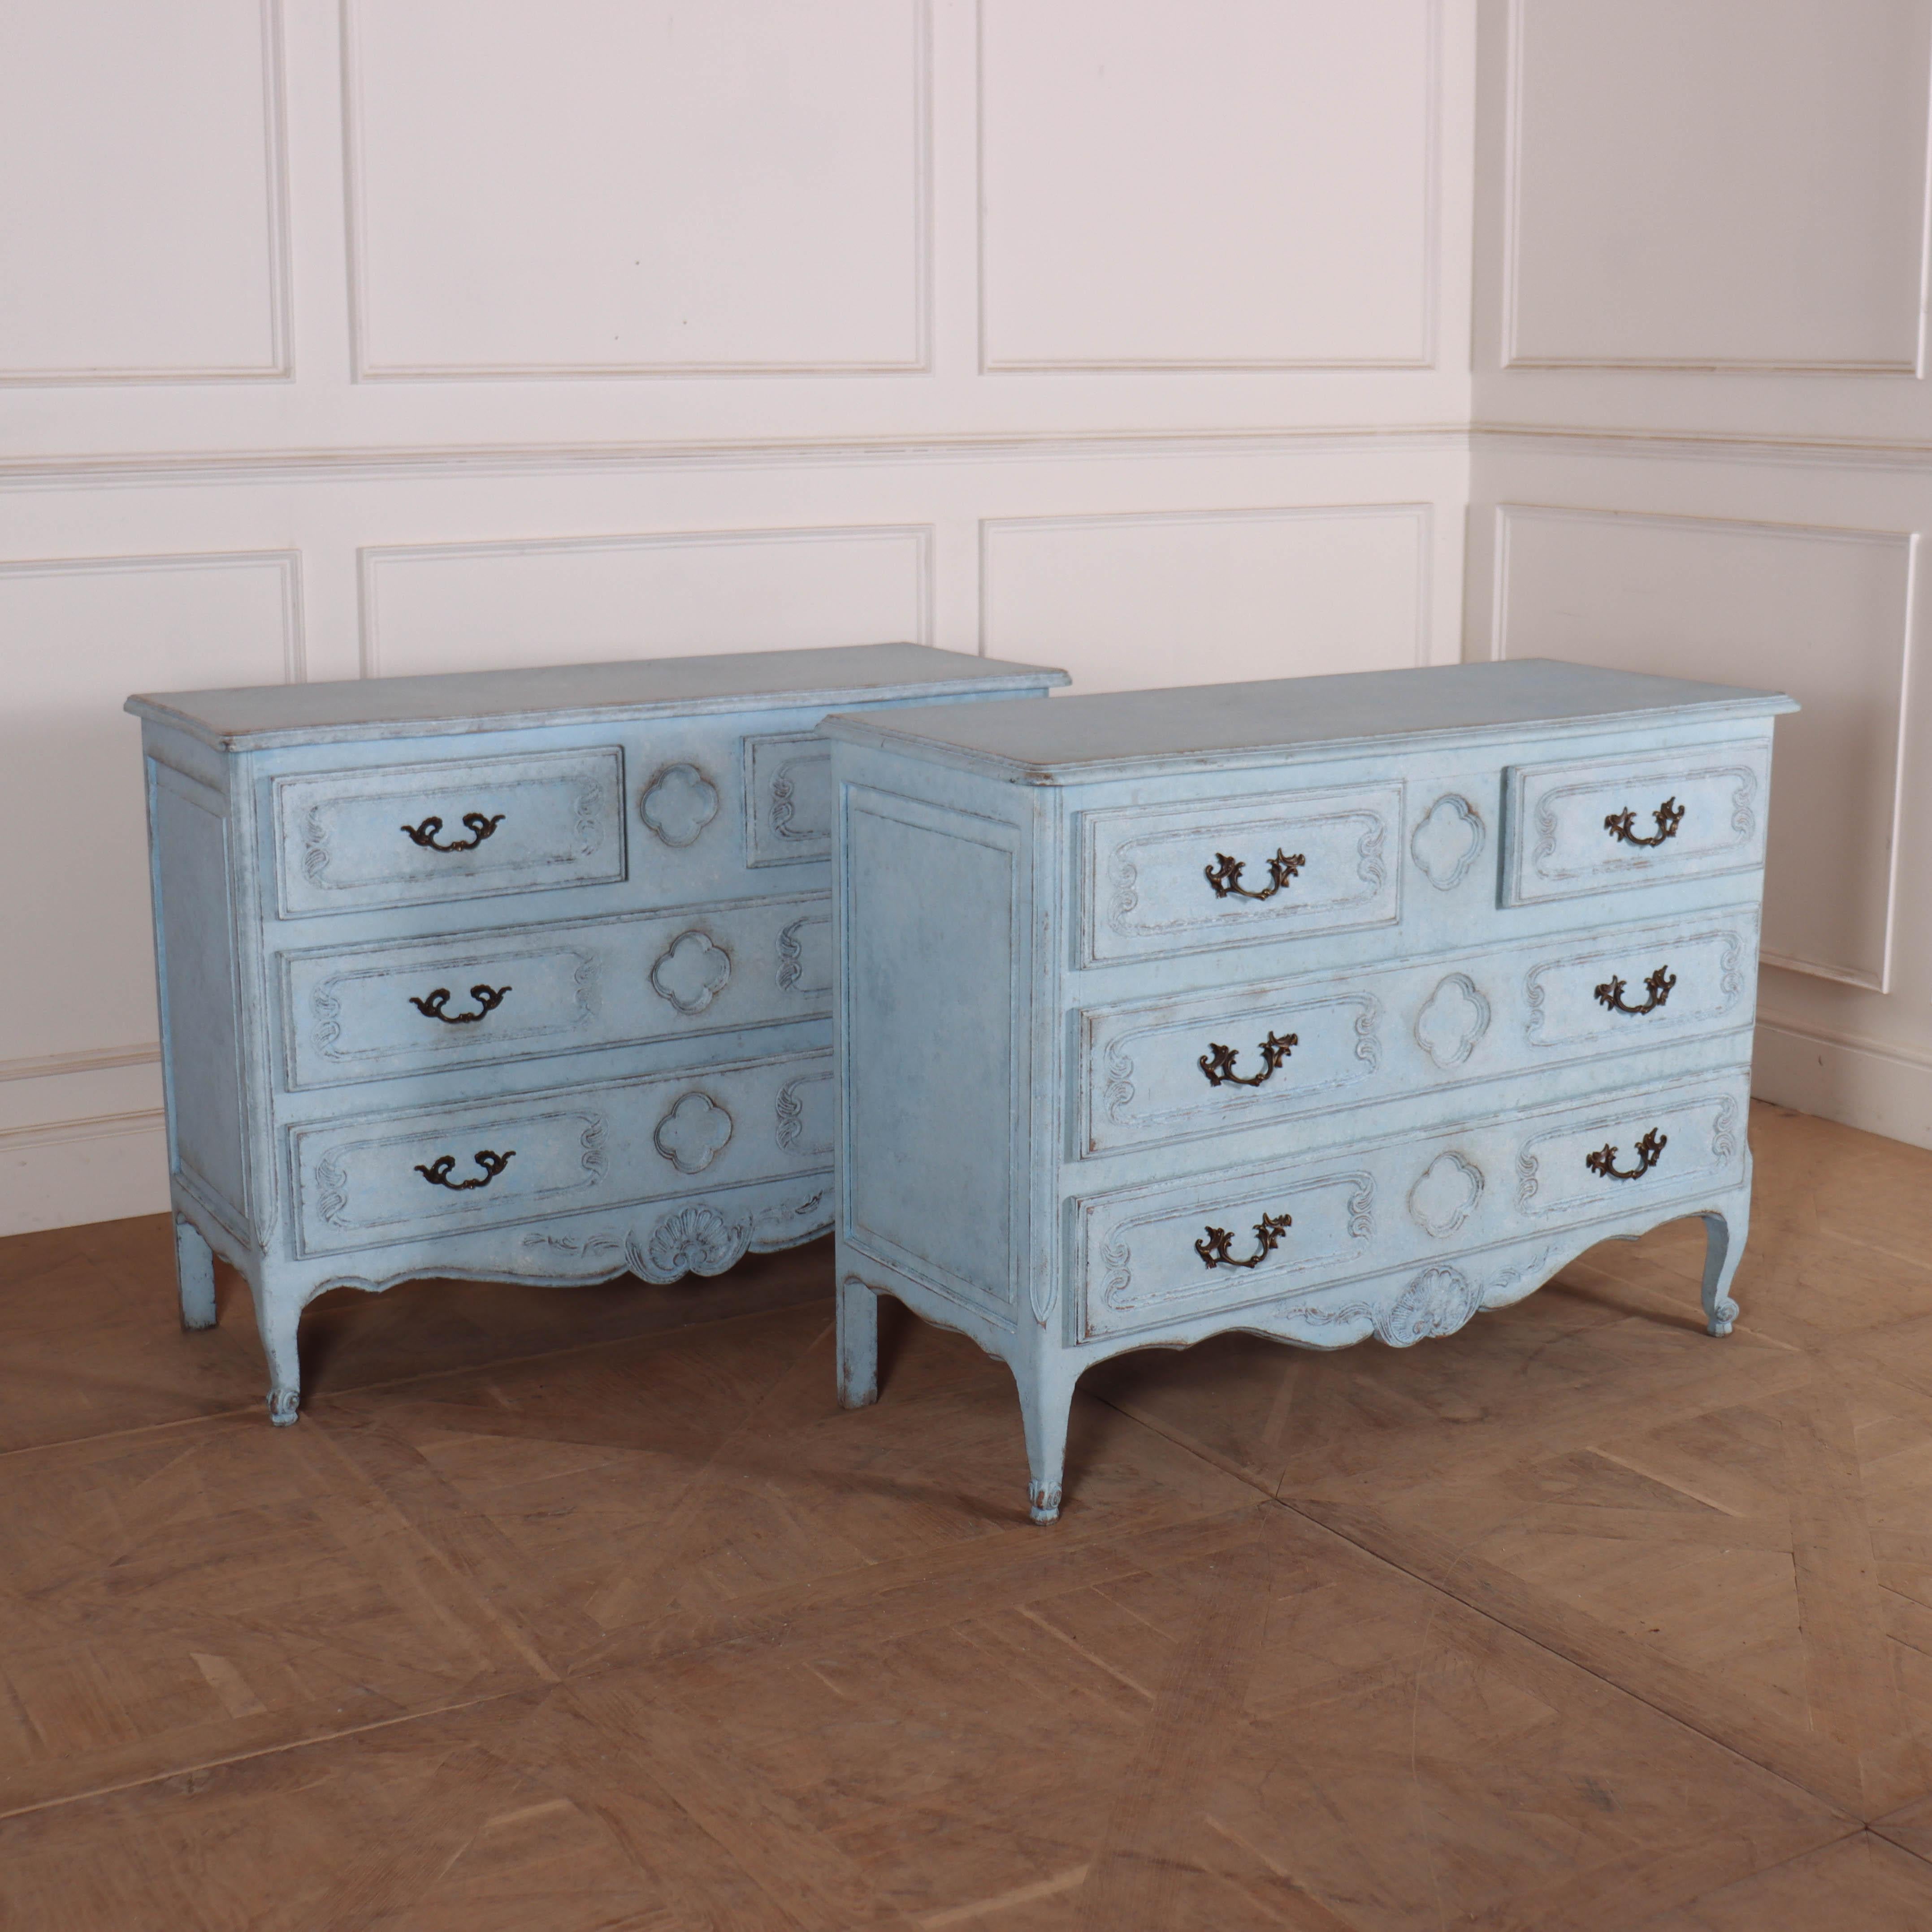 Pair of early 20th century French painted oak commodes. 1930.

Reference: 7835

Dimensions
48.5 inches (123 cms) Wide
19.5 inches (50 cms) Deep
35.5 inches (90 cms) High